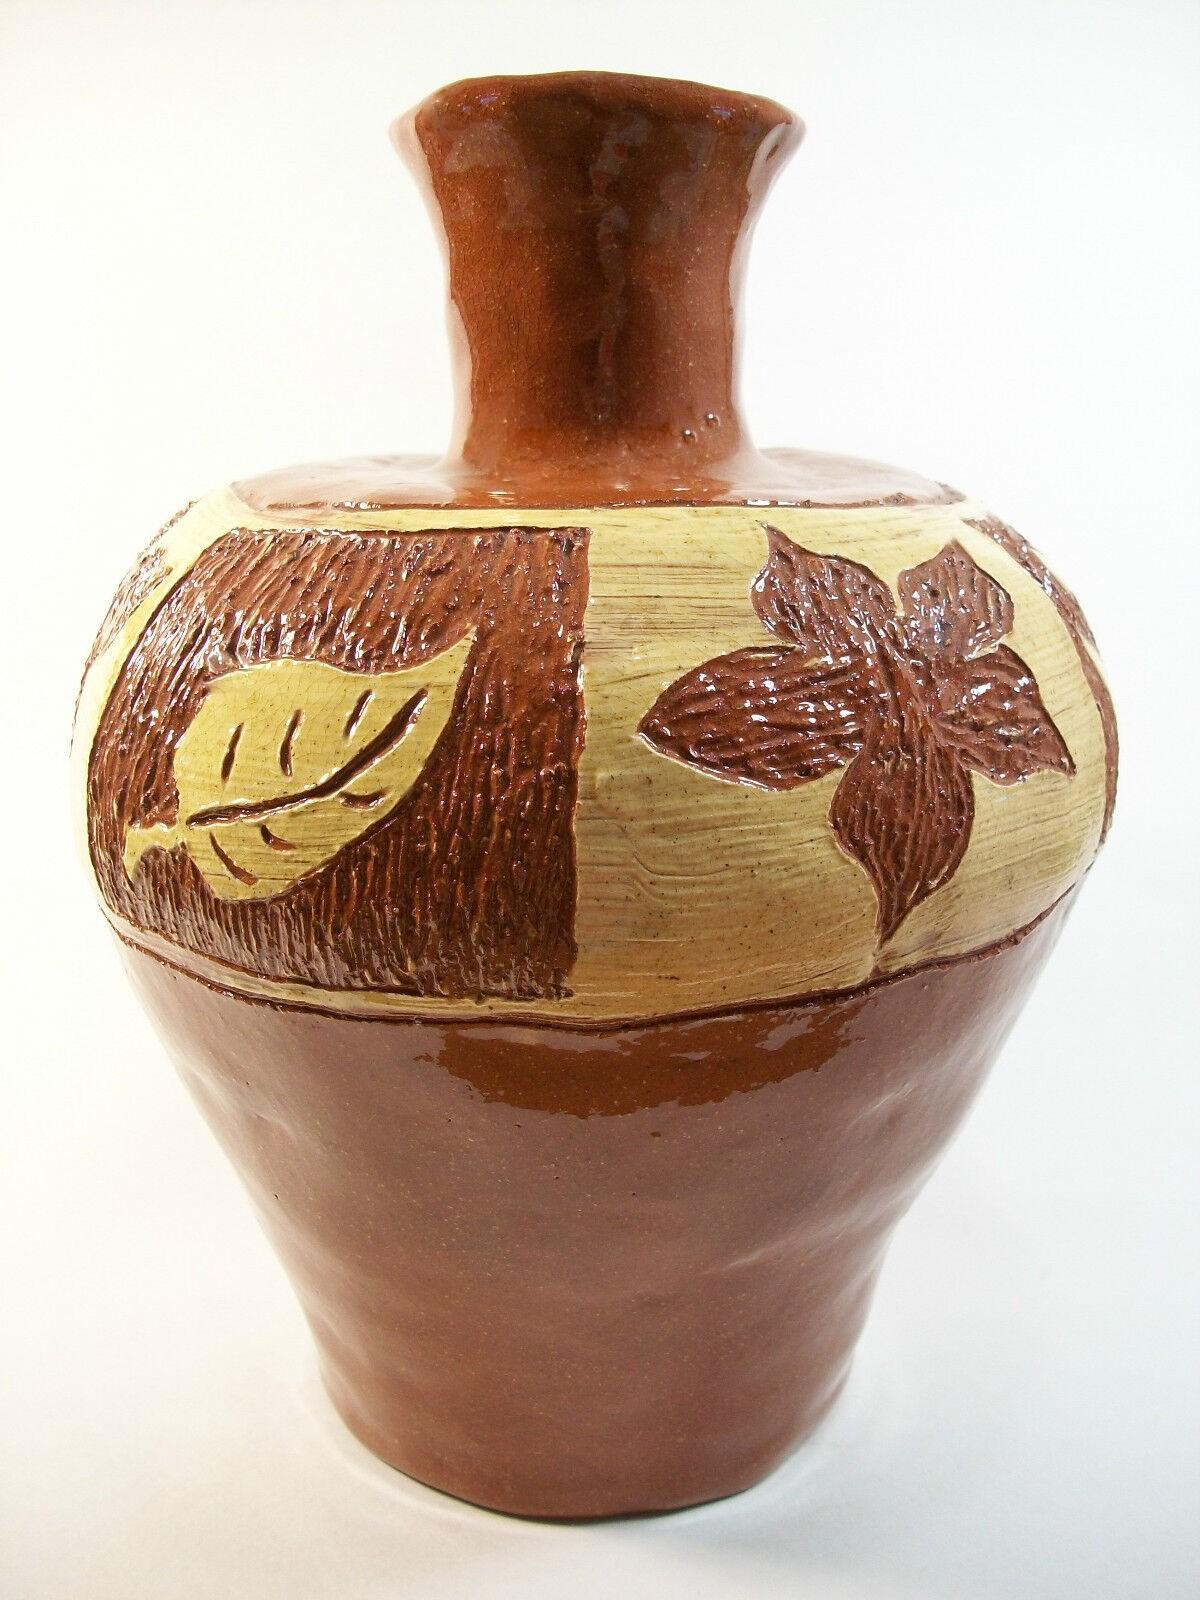 Vintage studio pottery folk art terracotta vase with clear glaze - yellow slip sgraffito decorated with stylized flowers and leaves - heavily potted - unsigned - country of origin unknown - mid 20th century.

Excellent état vintage - pas de perte